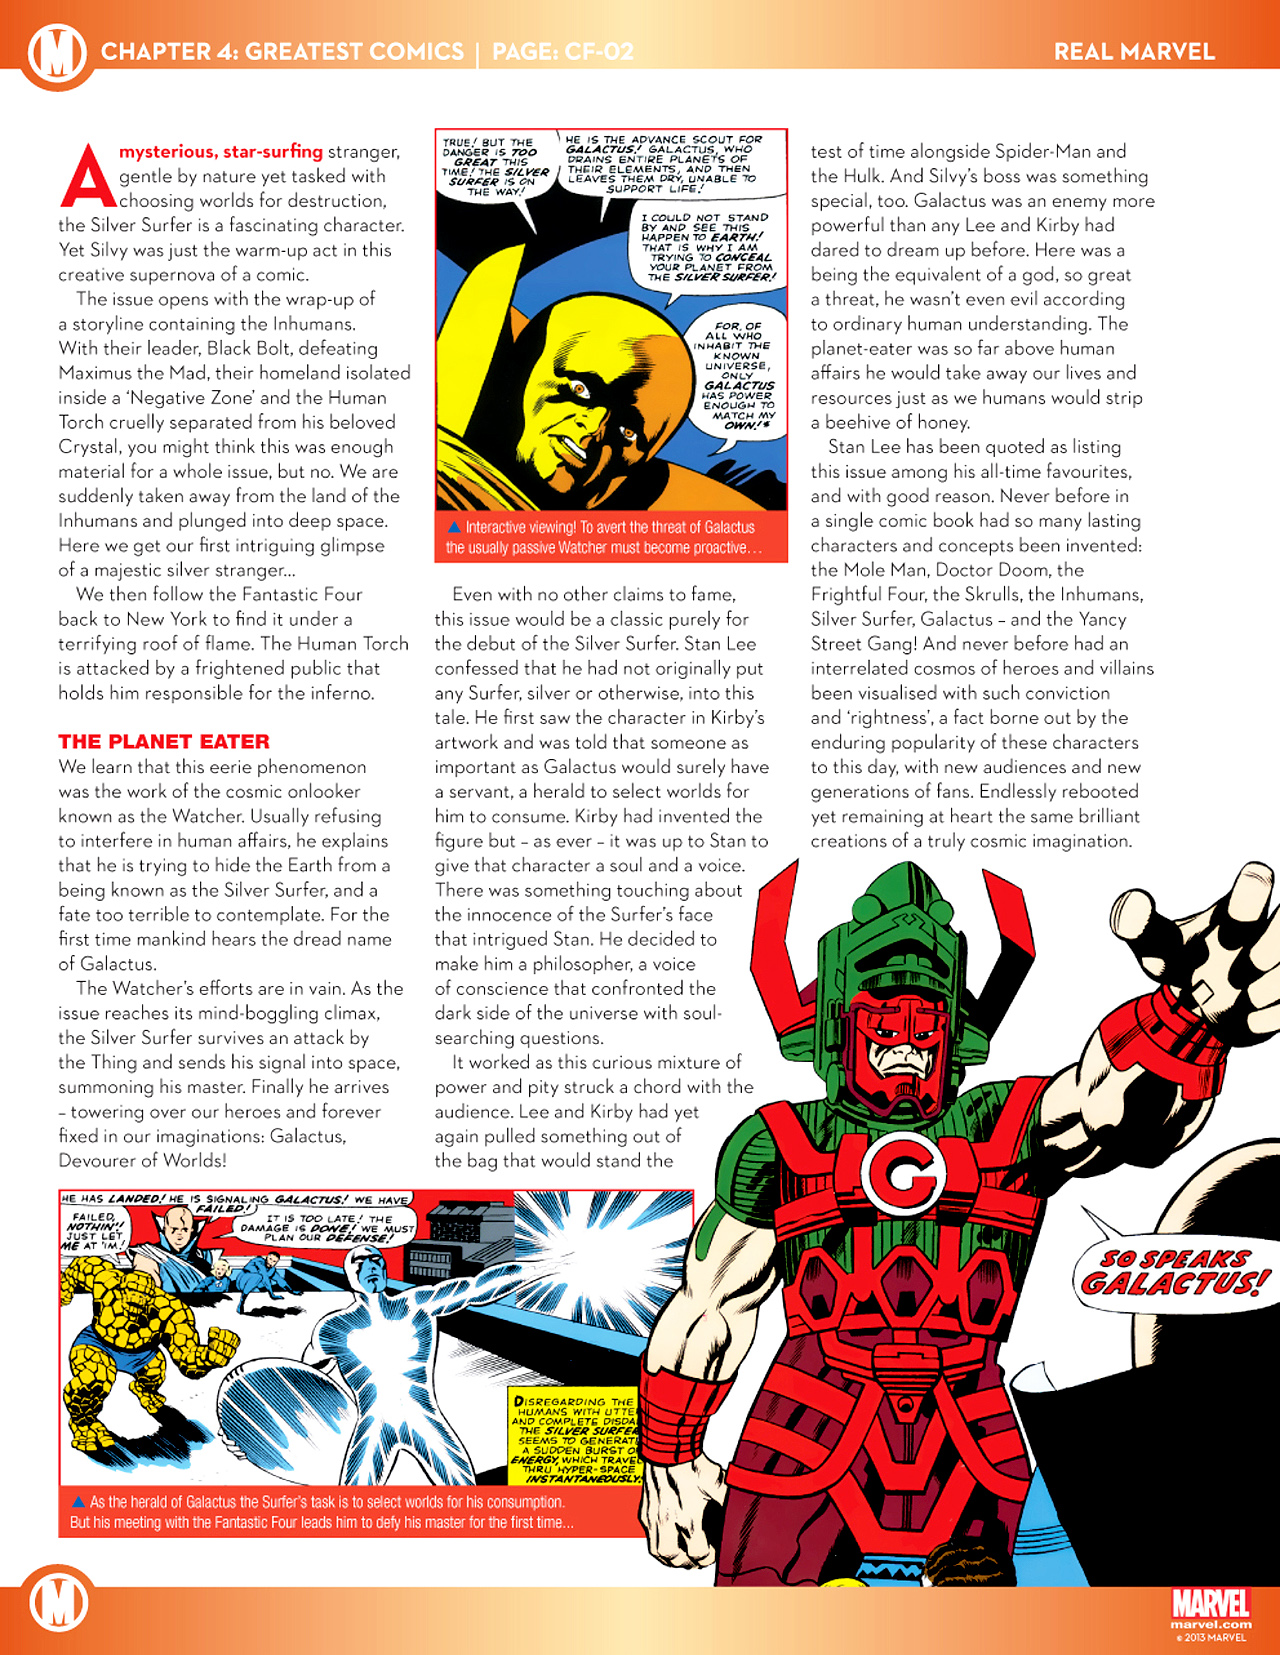 Read online Marvel Fact Files comic -  Issue #17 - 22